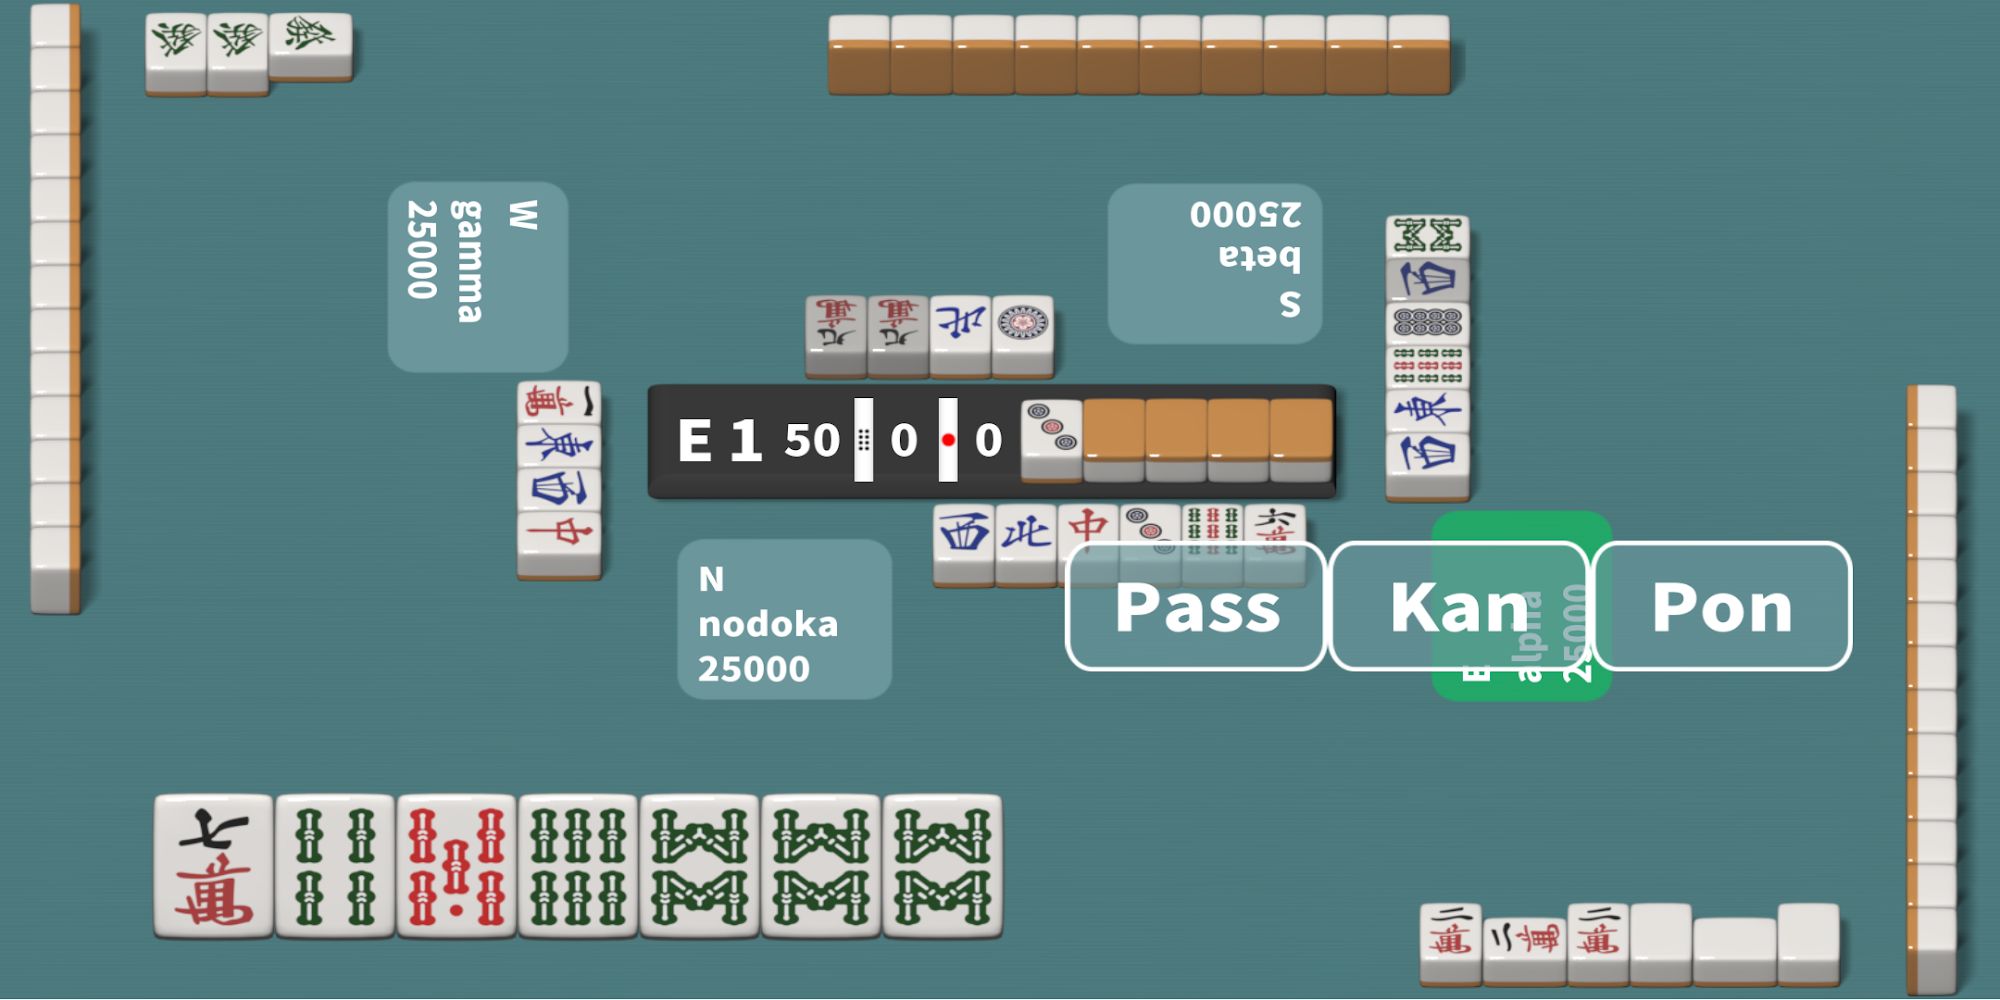 Full version of Android Multiplayer game apk R Mahjong - Riichi Mahjong for tablet and phone.